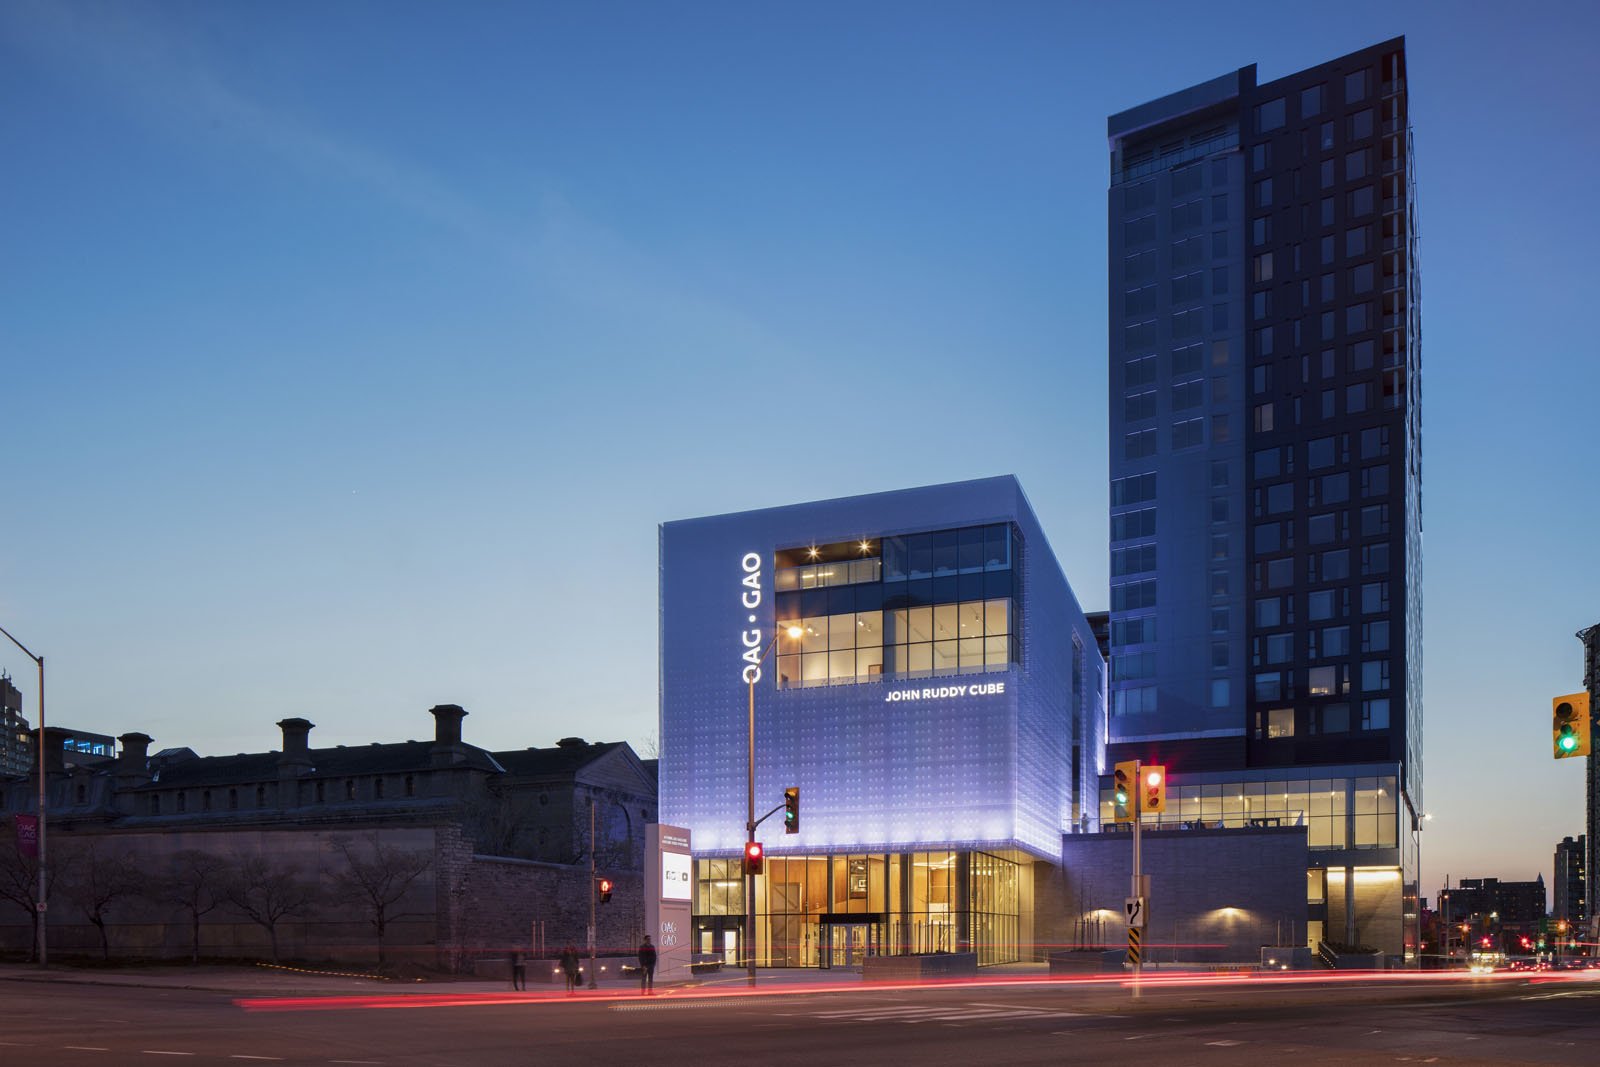 The new Ottawa Art Gallery dissolves into the sky with clever detailing